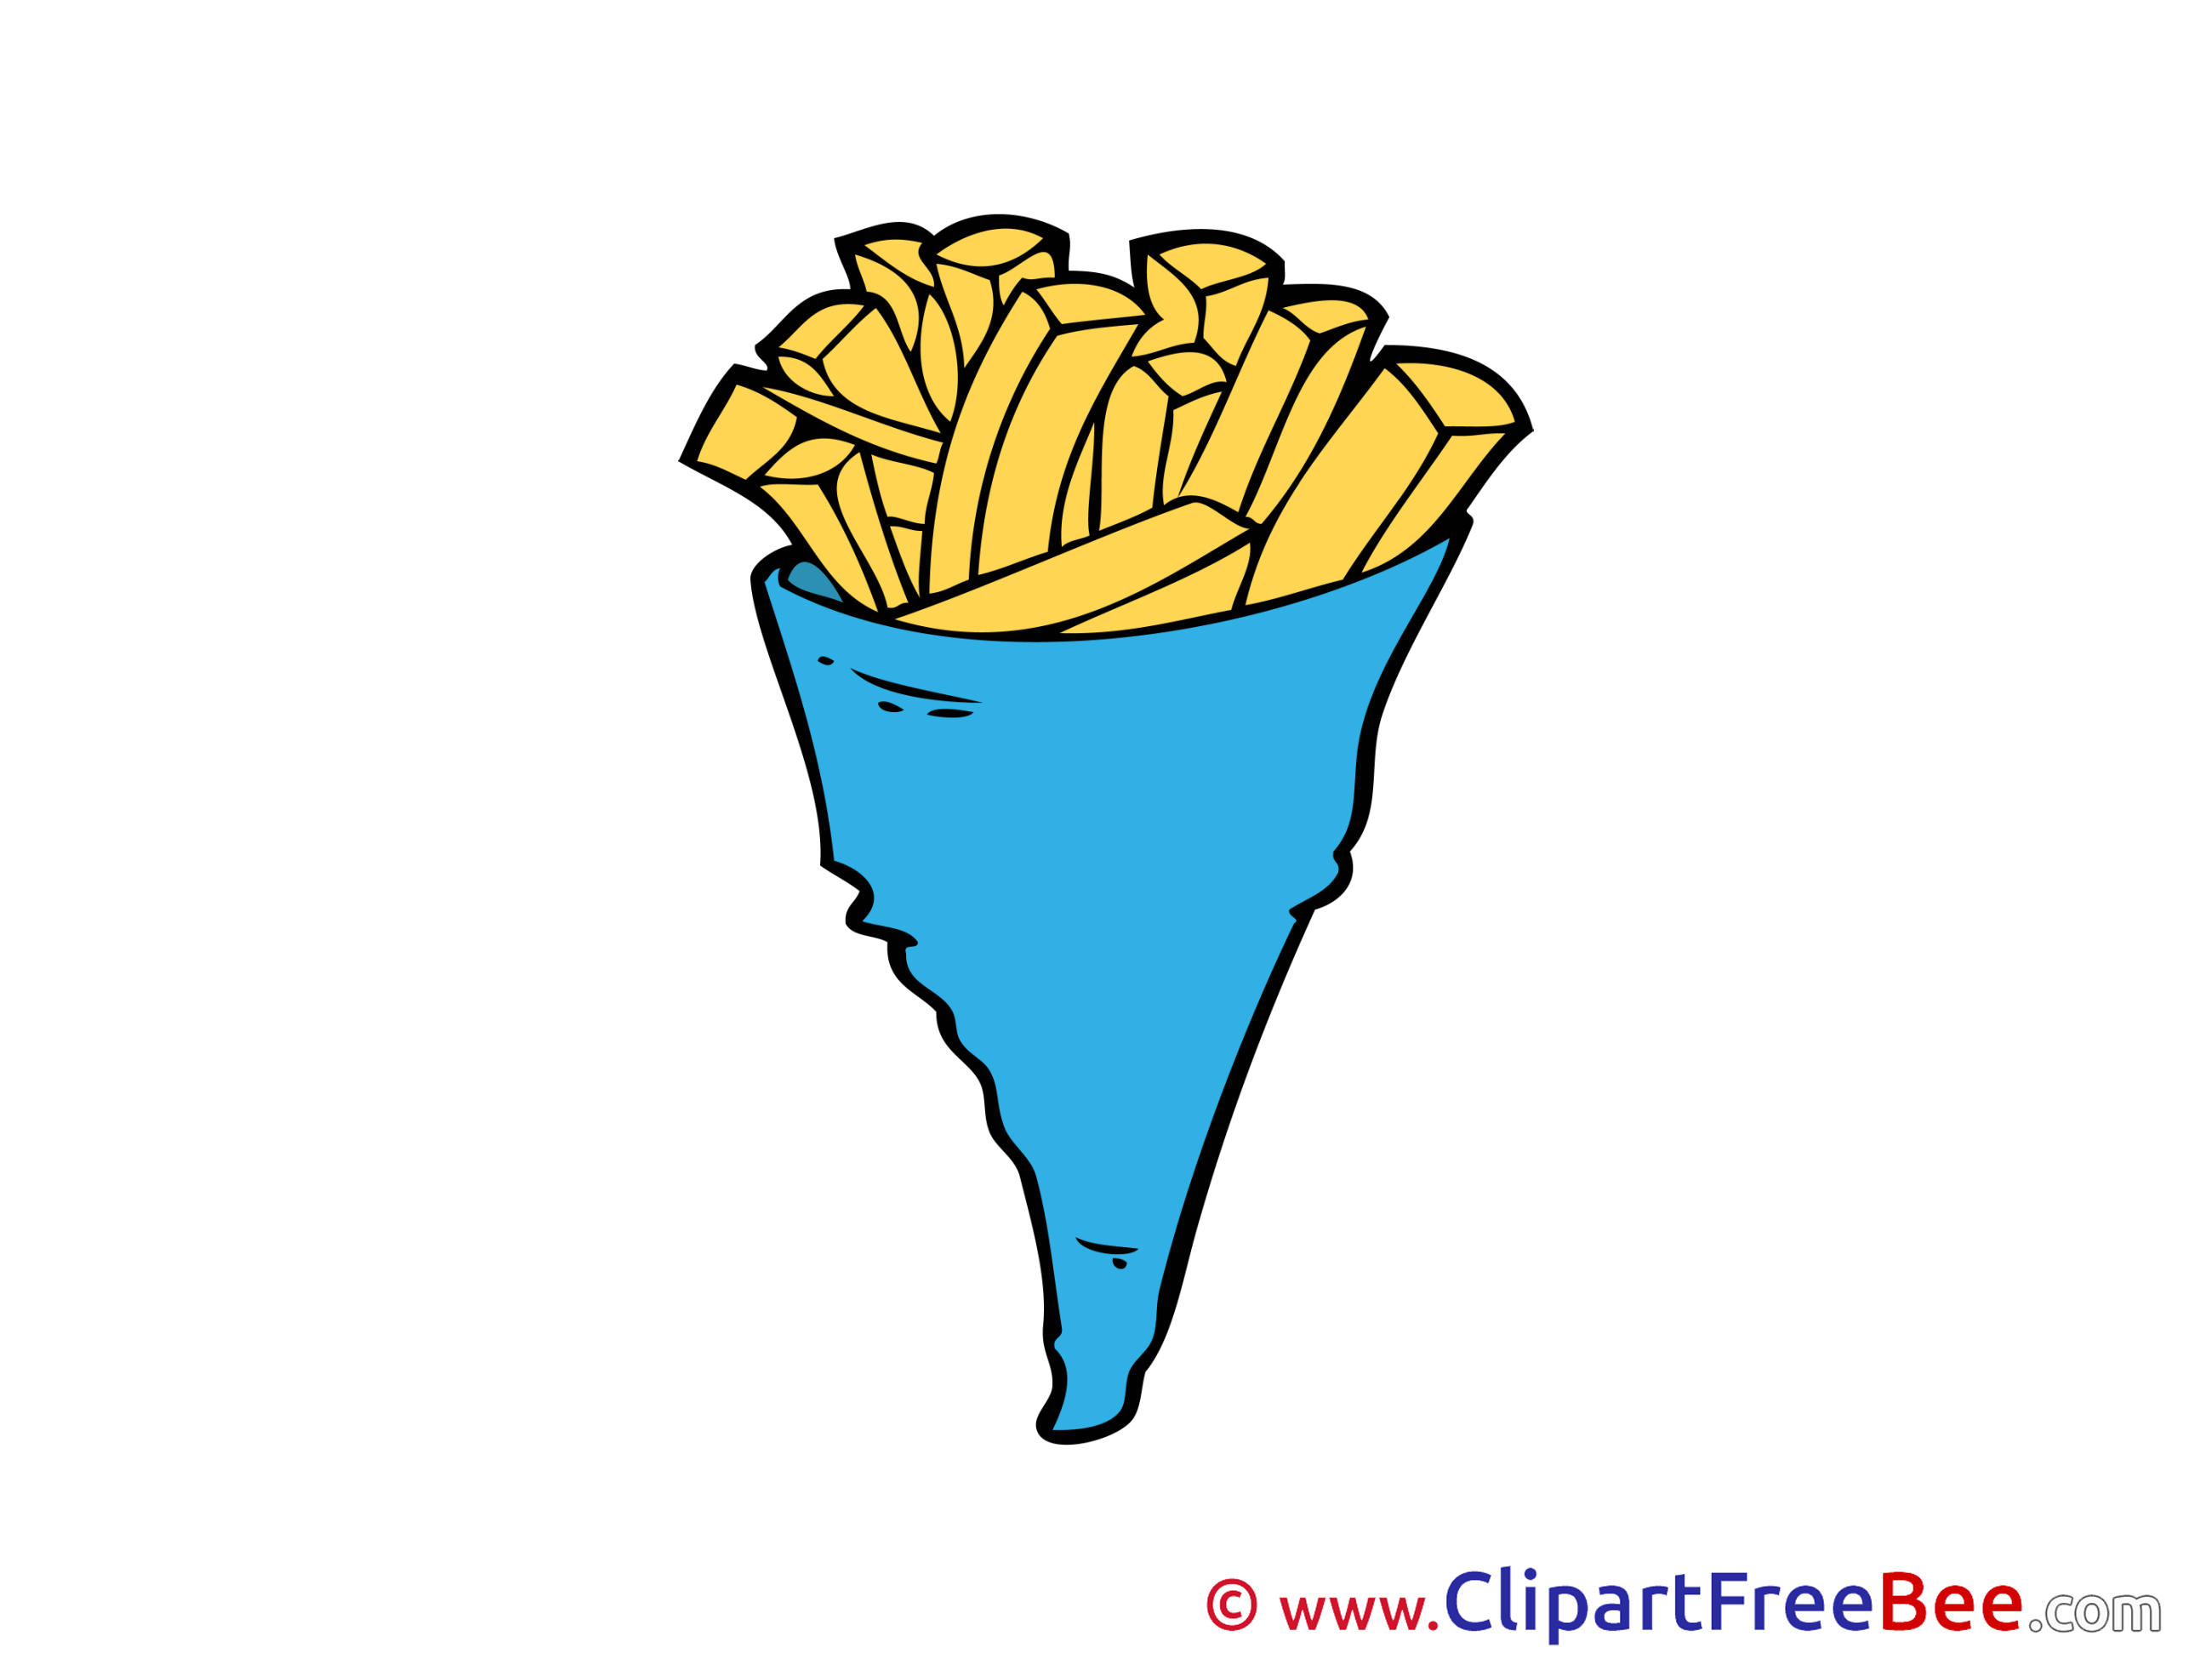 Fried Popatos download Clip Art for free